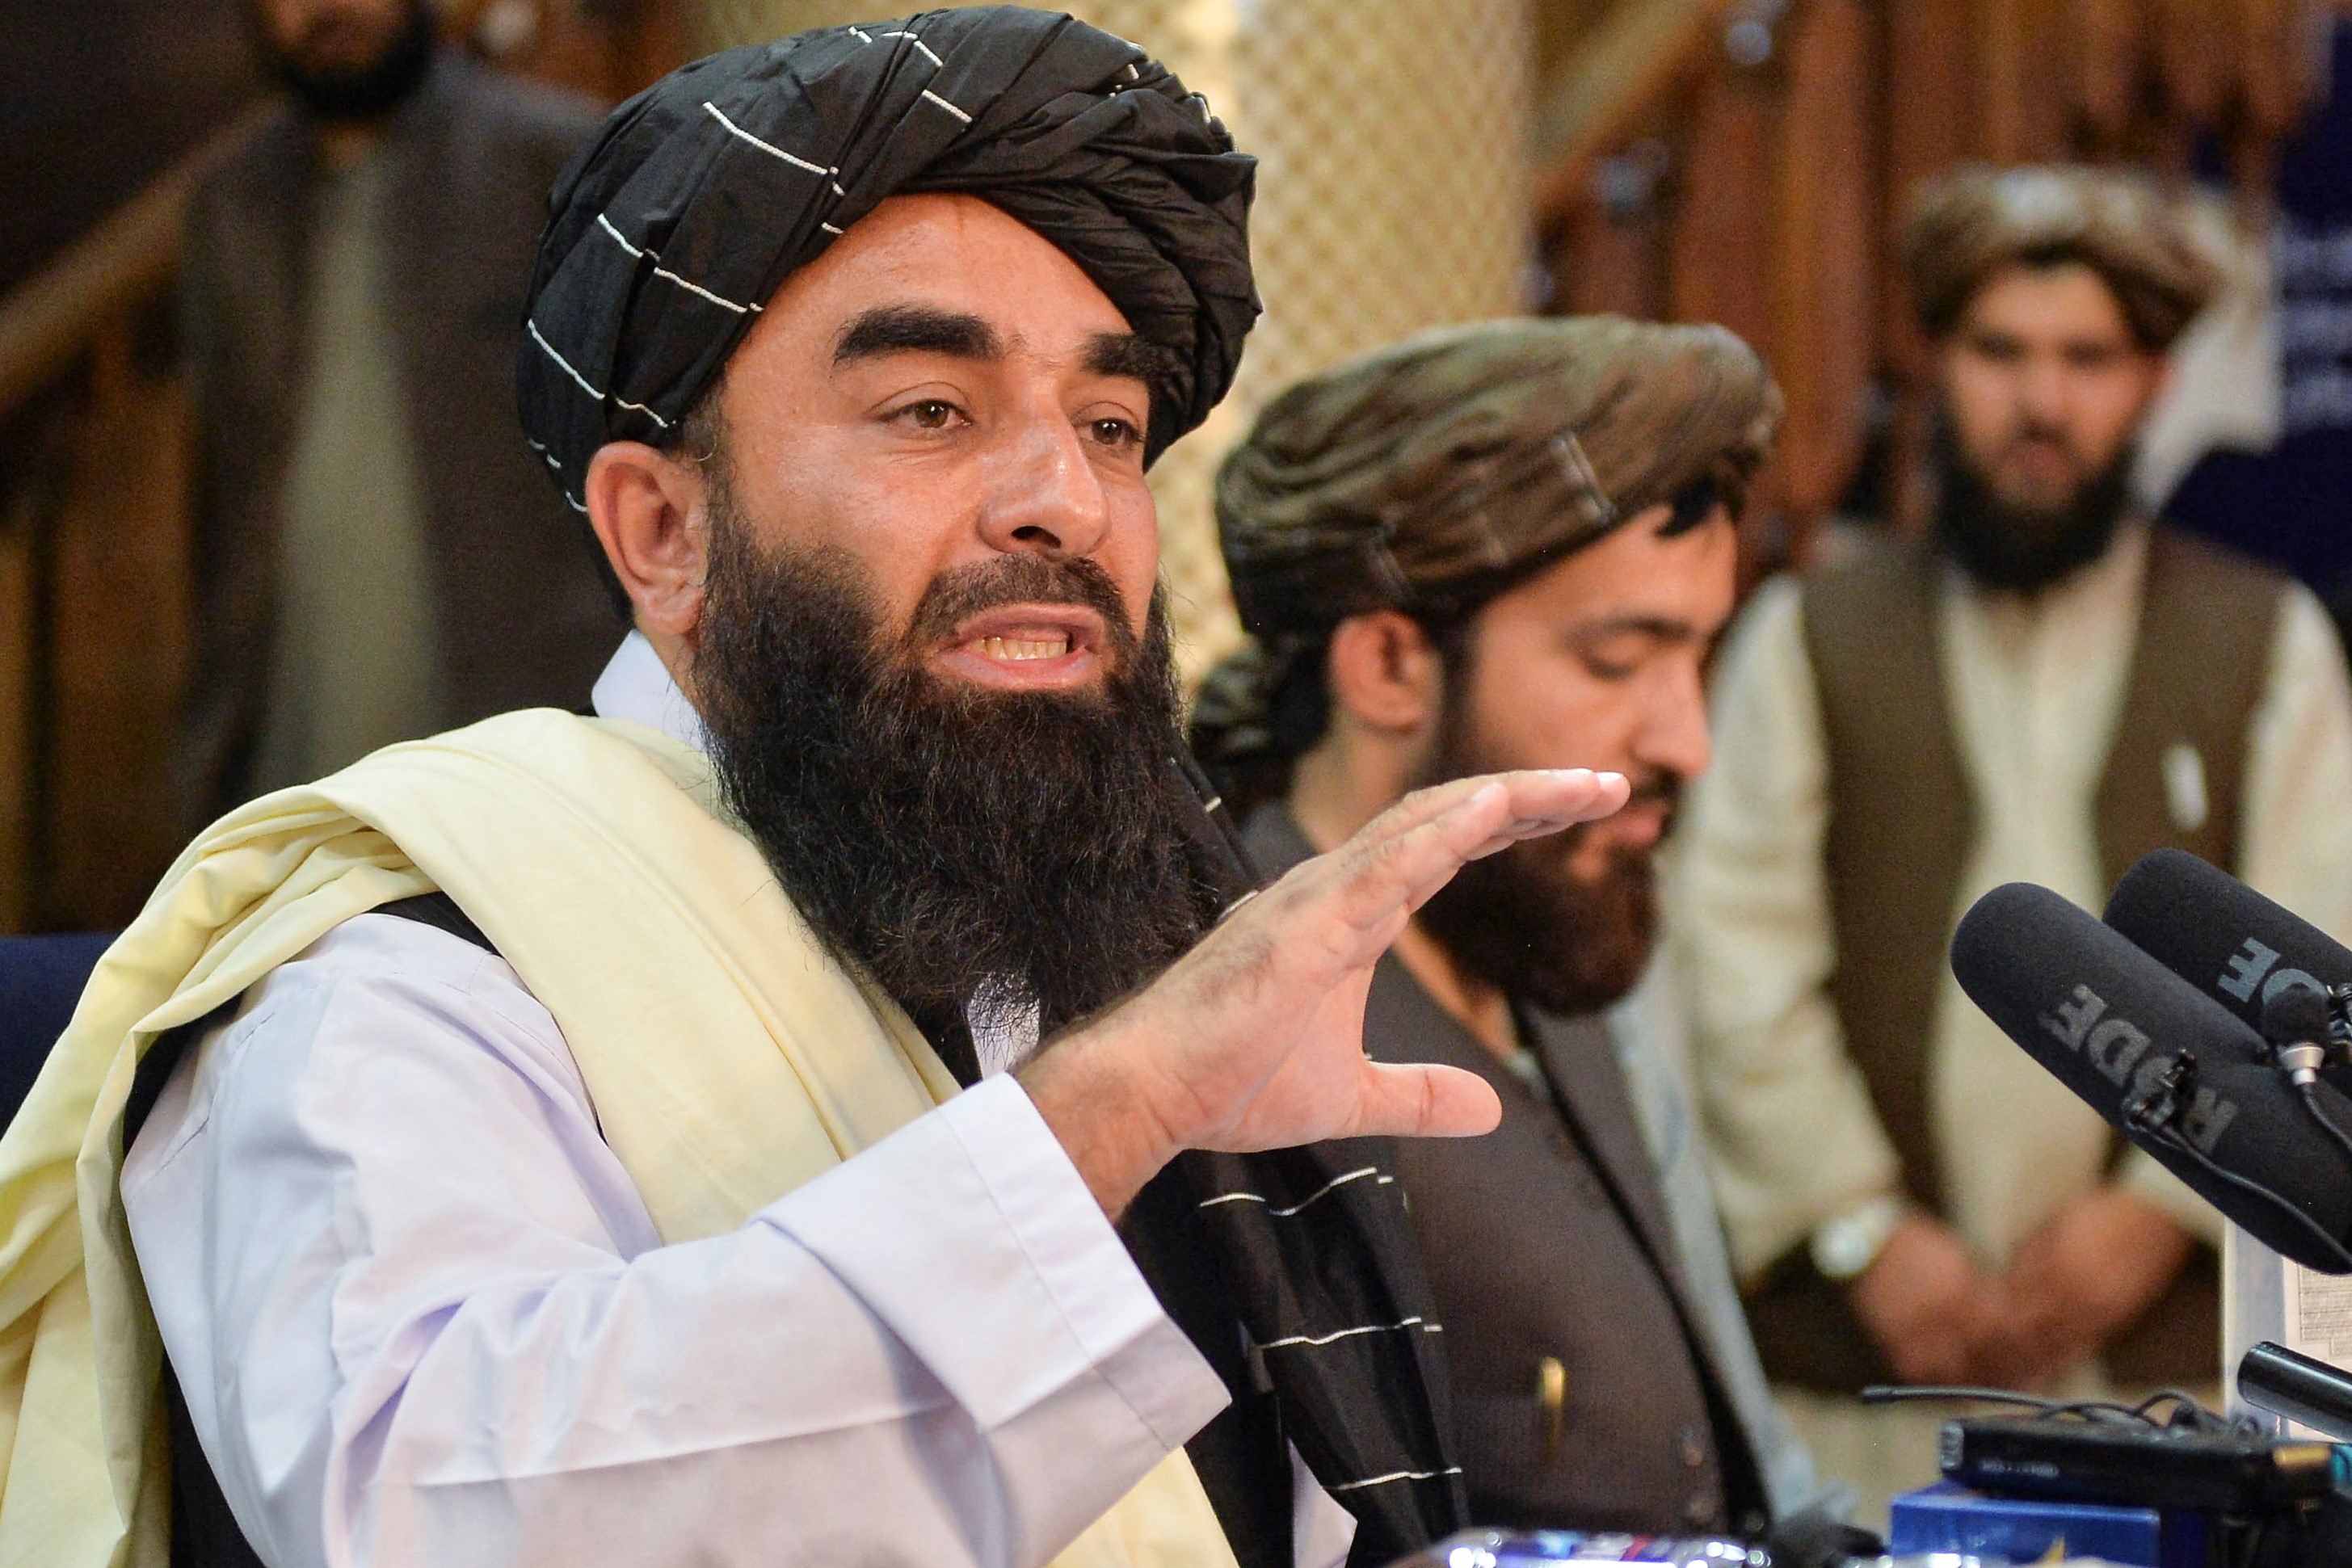 Taliban spokesperson Zabihullah Mujahid (L) during the first press conference in Kabul on 17 August, 2021 (AFP)